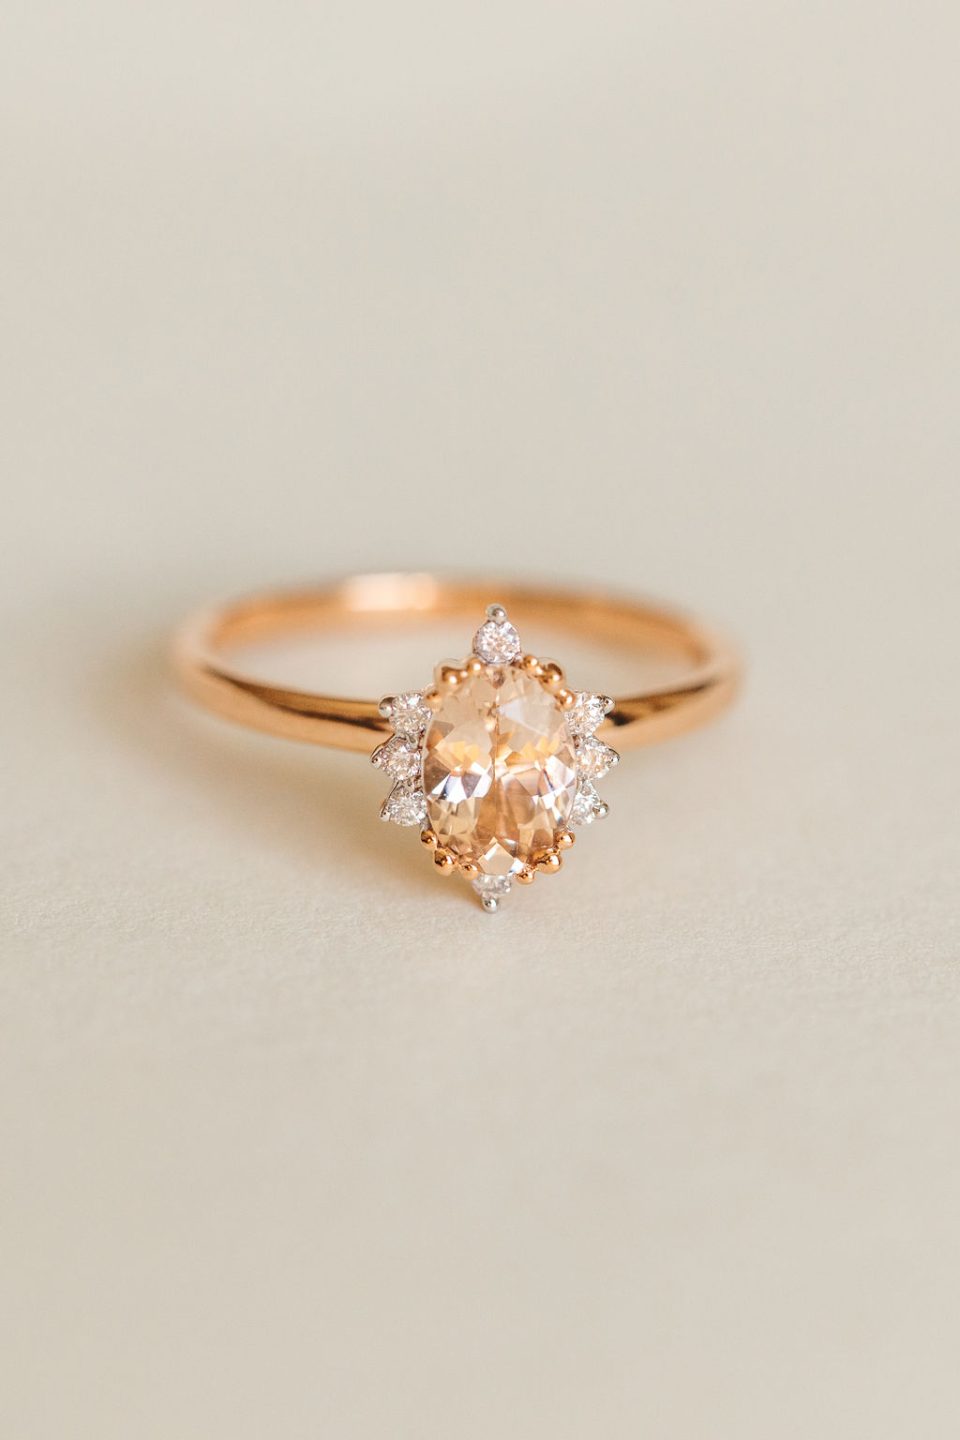 Ring 7X5MM Morganite and .08 Carat TW Diamonds in 14kt Rose Gold